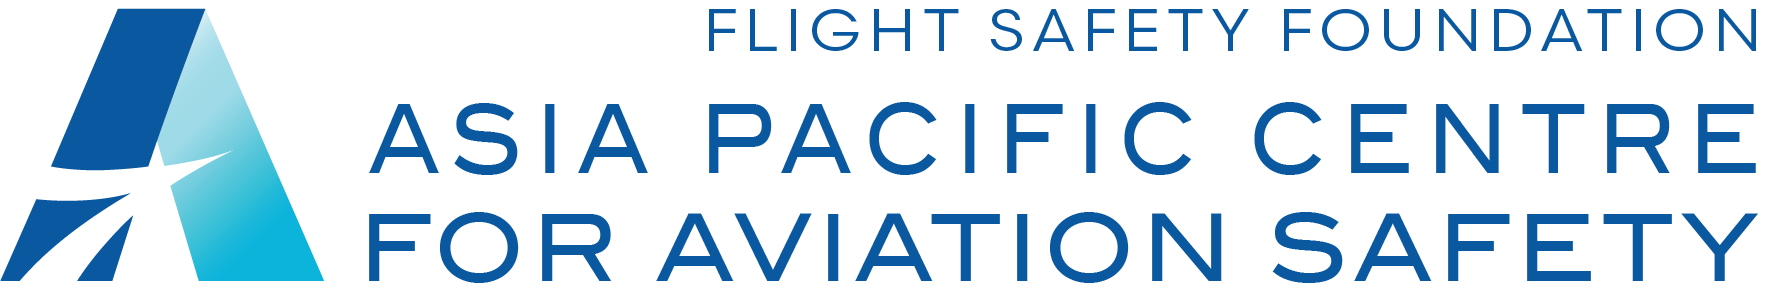 Asia Pacific Centre for Aviation Safety